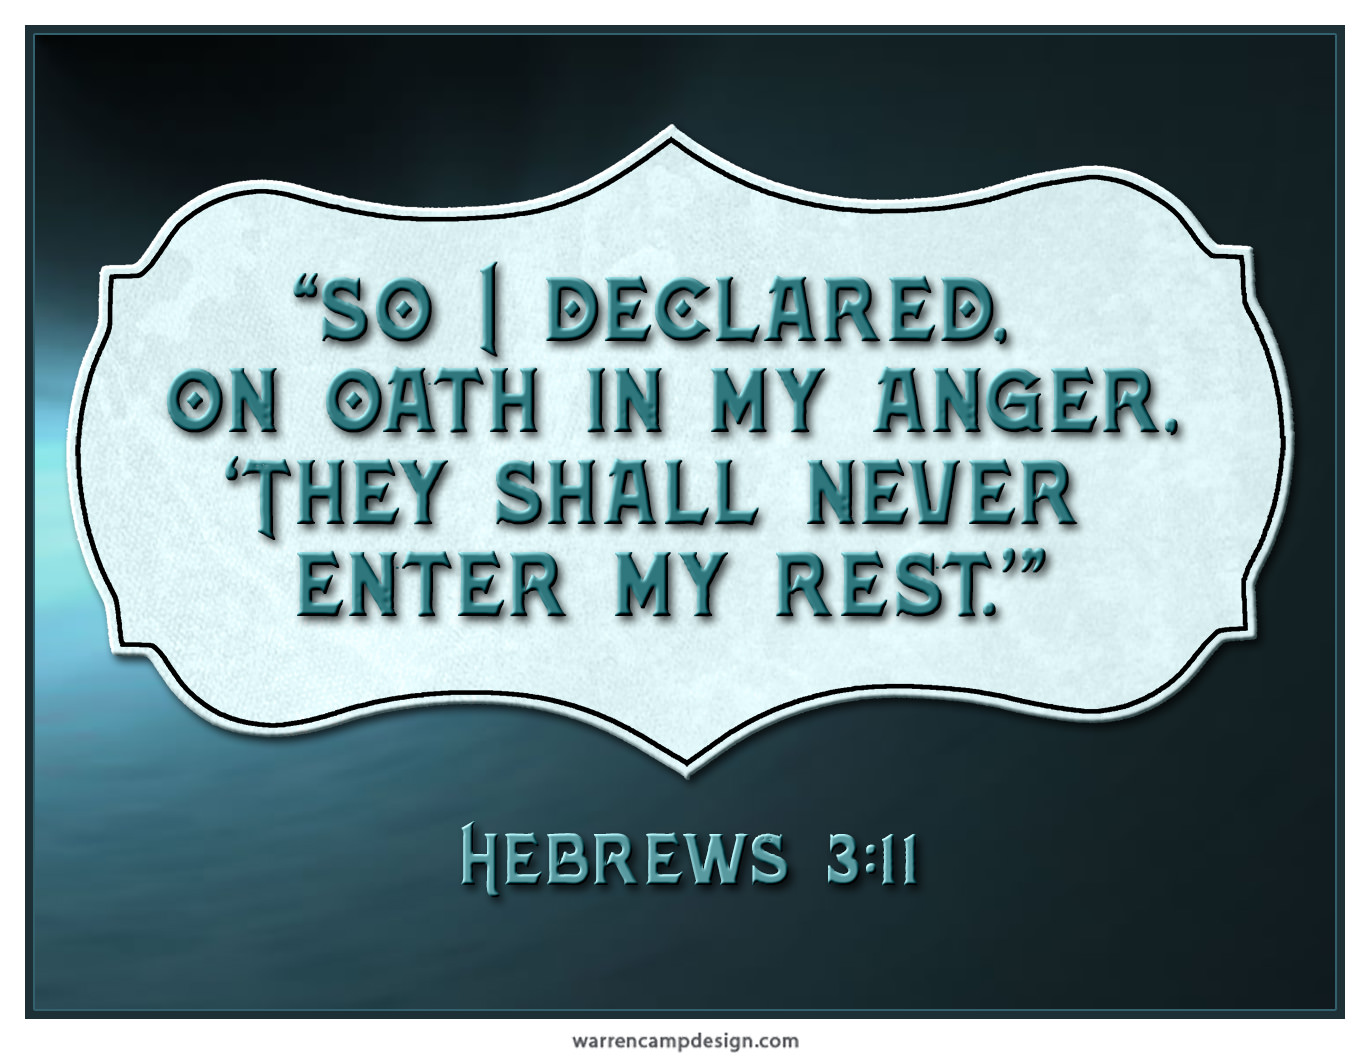 Scripture picture of Hebrews 3:11, people with hard hearts will never enter God's rest